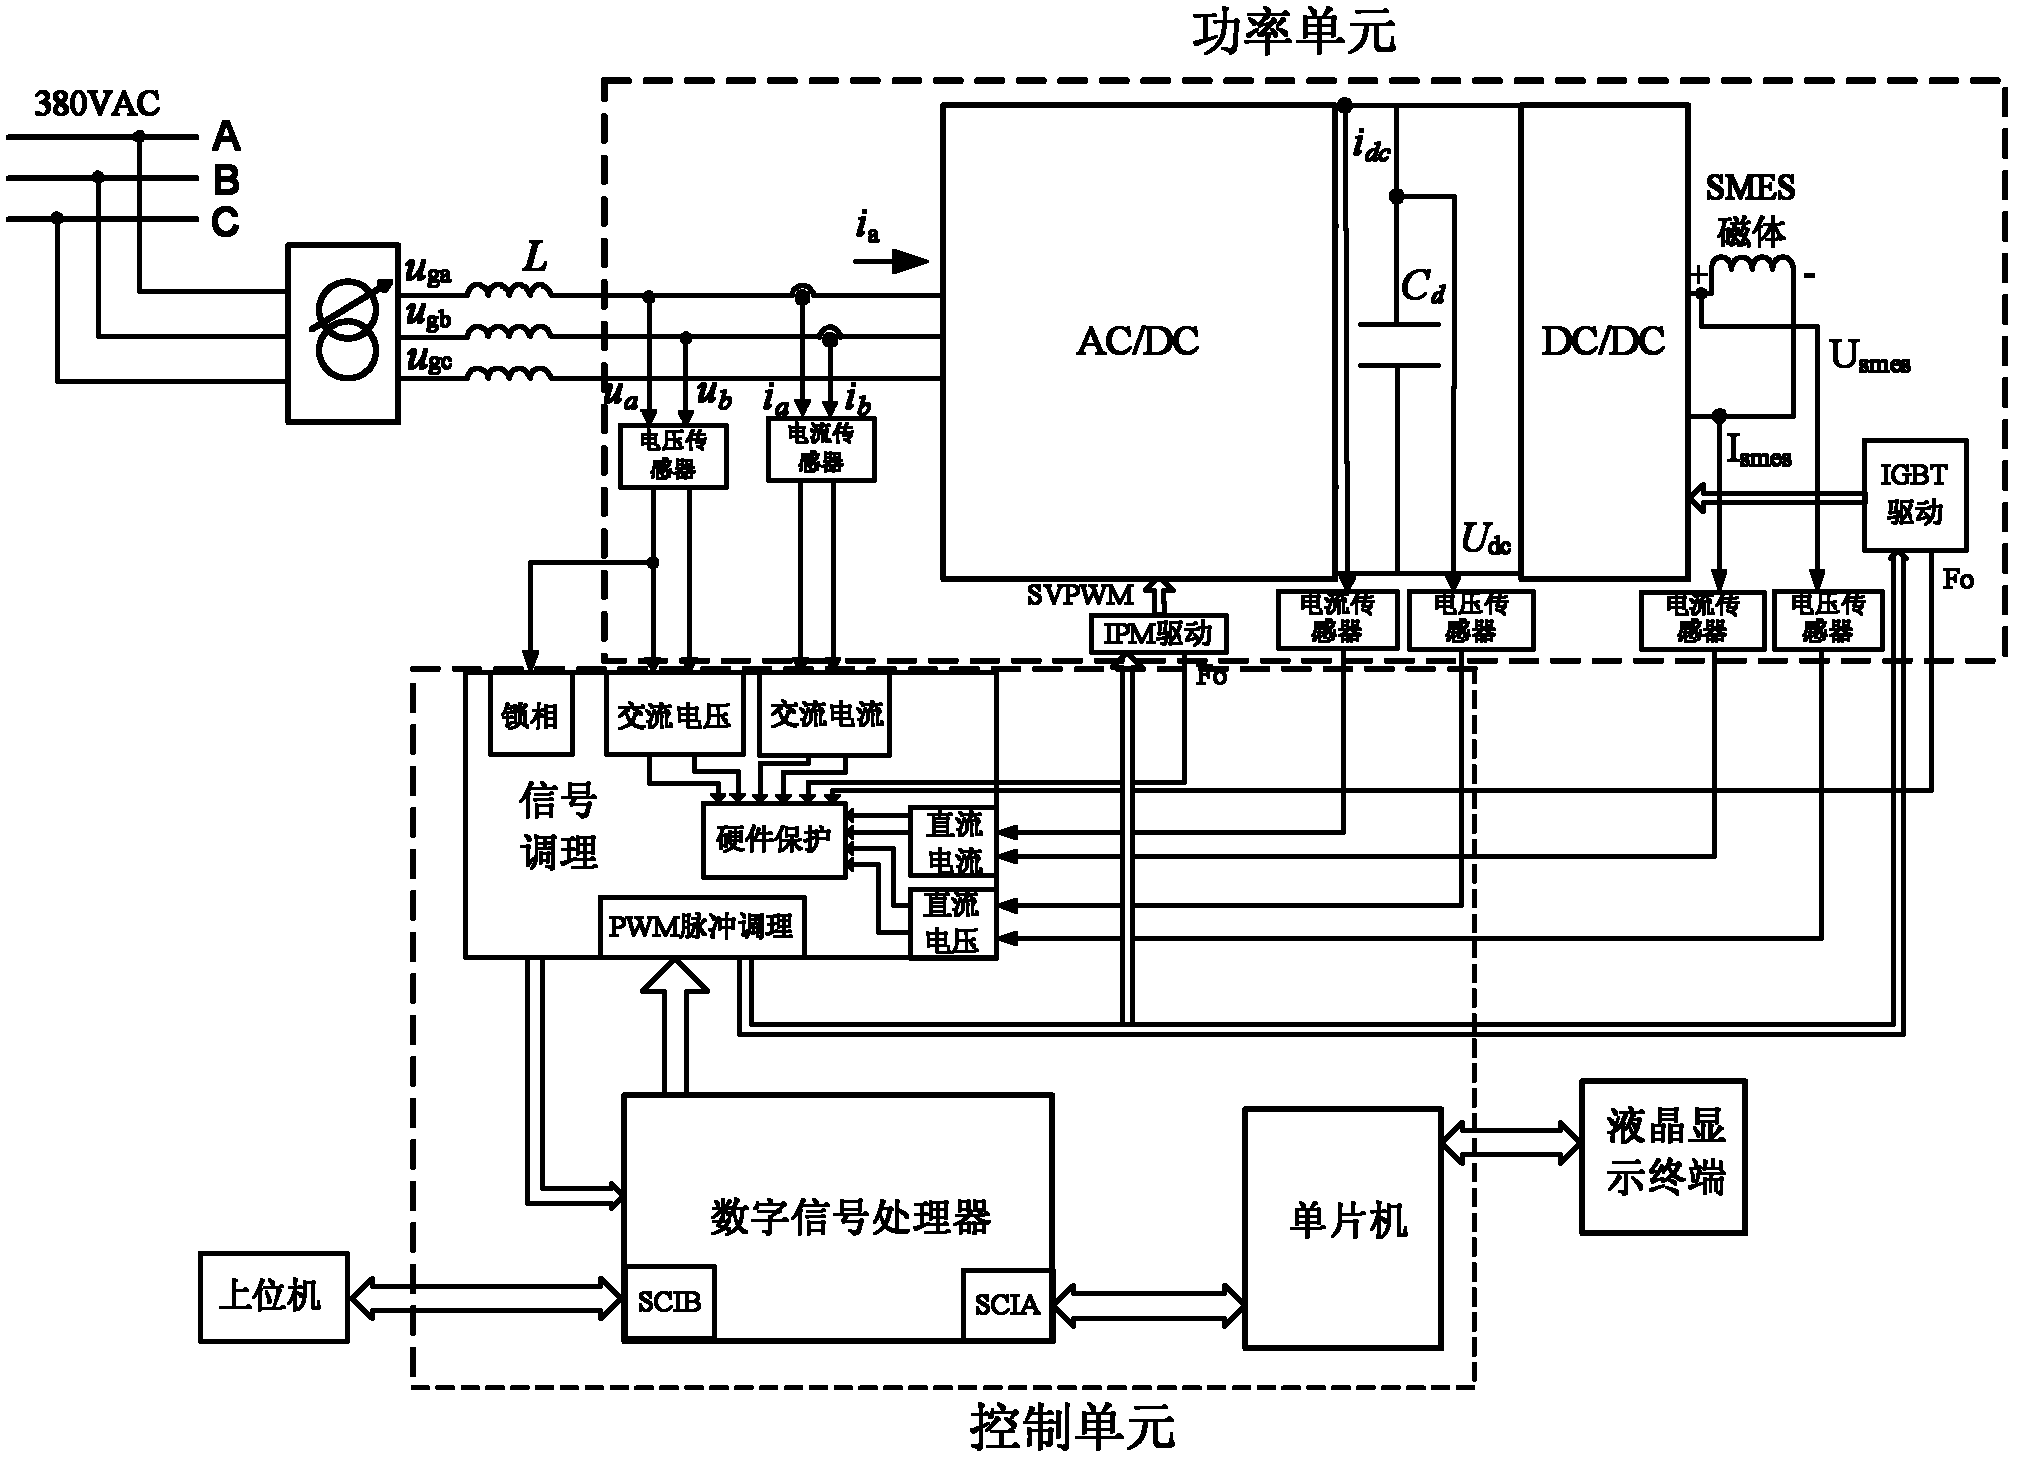 Grid-connected full digital monitoring system for controllable high-temperature superconducting magnetic energy storage (SMES) system